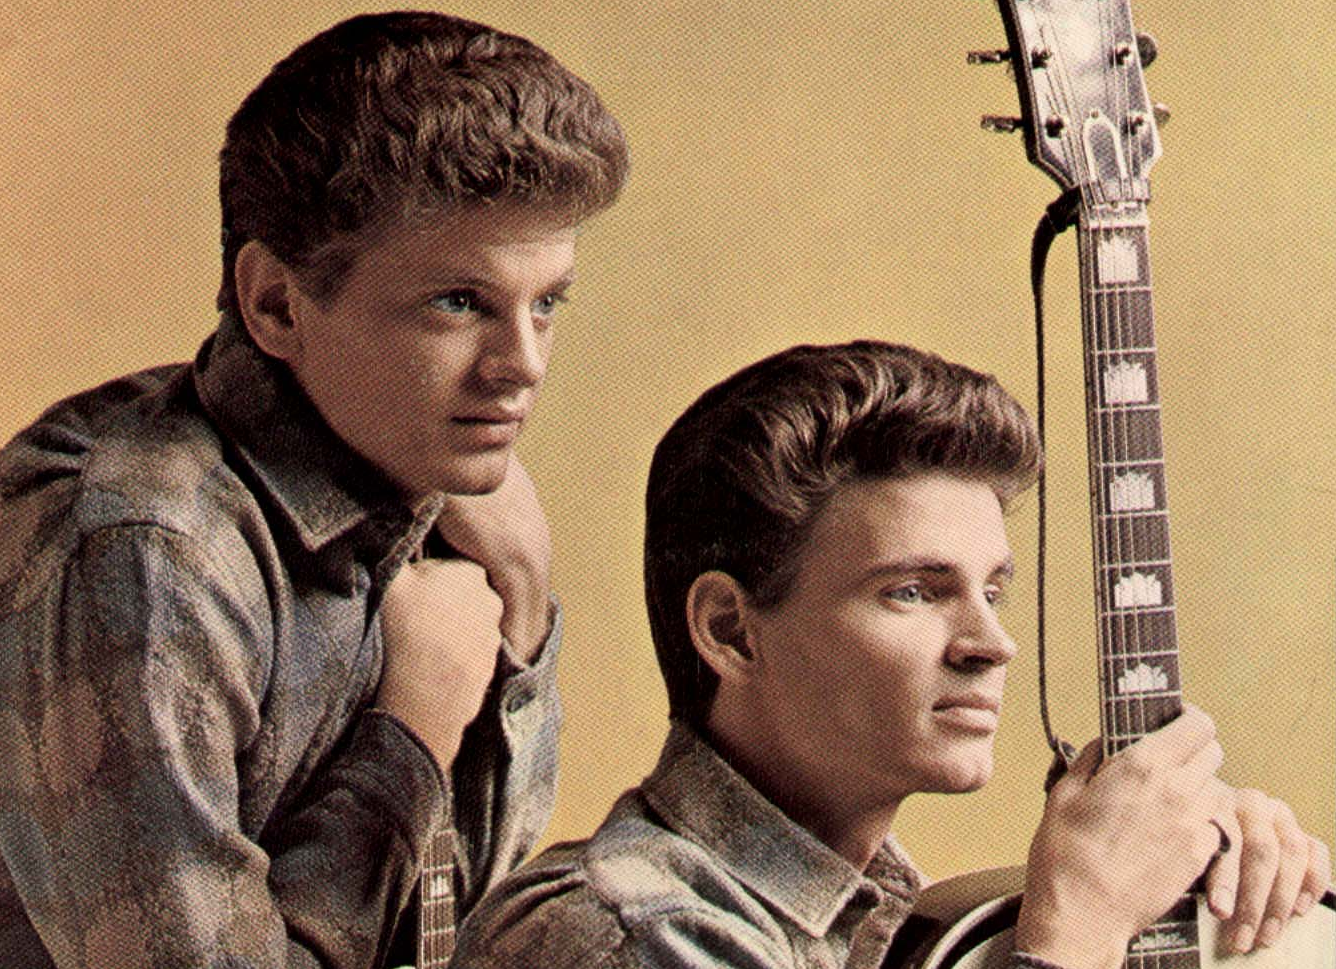 "Long Blonde Hair" by The Everly Brothers - wide 6